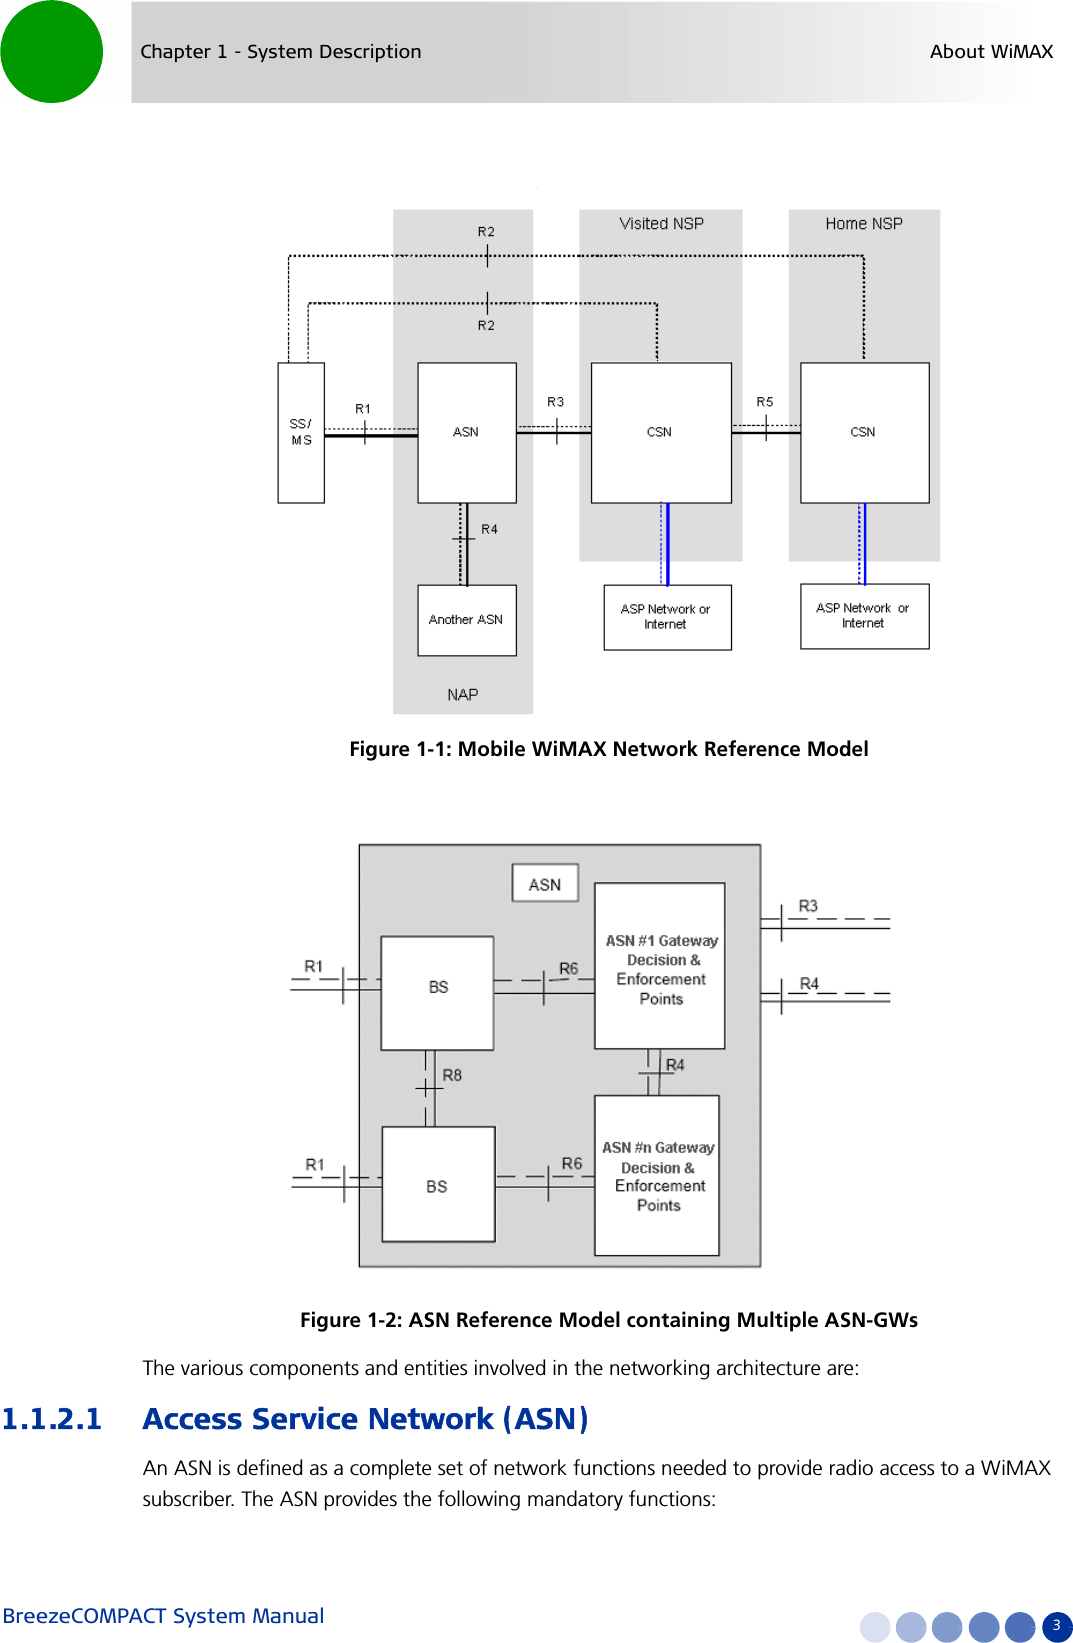 BreezeCOMPACT System Manual 3Chapter 1 - System Description About WiMAX. The various components and entities involved in the networking architecture are:1.1.2.1 Access Service Network (ASN)An ASN is defined as a complete set of network functions needed to provide radio access to a WiMAX subscriber. The ASN provides the following mandatory functions:Figure 1-1: Mobile WiMAX Network Reference ModelFigure 1-2: ASN Reference Model containing Multiple ASN-GWs